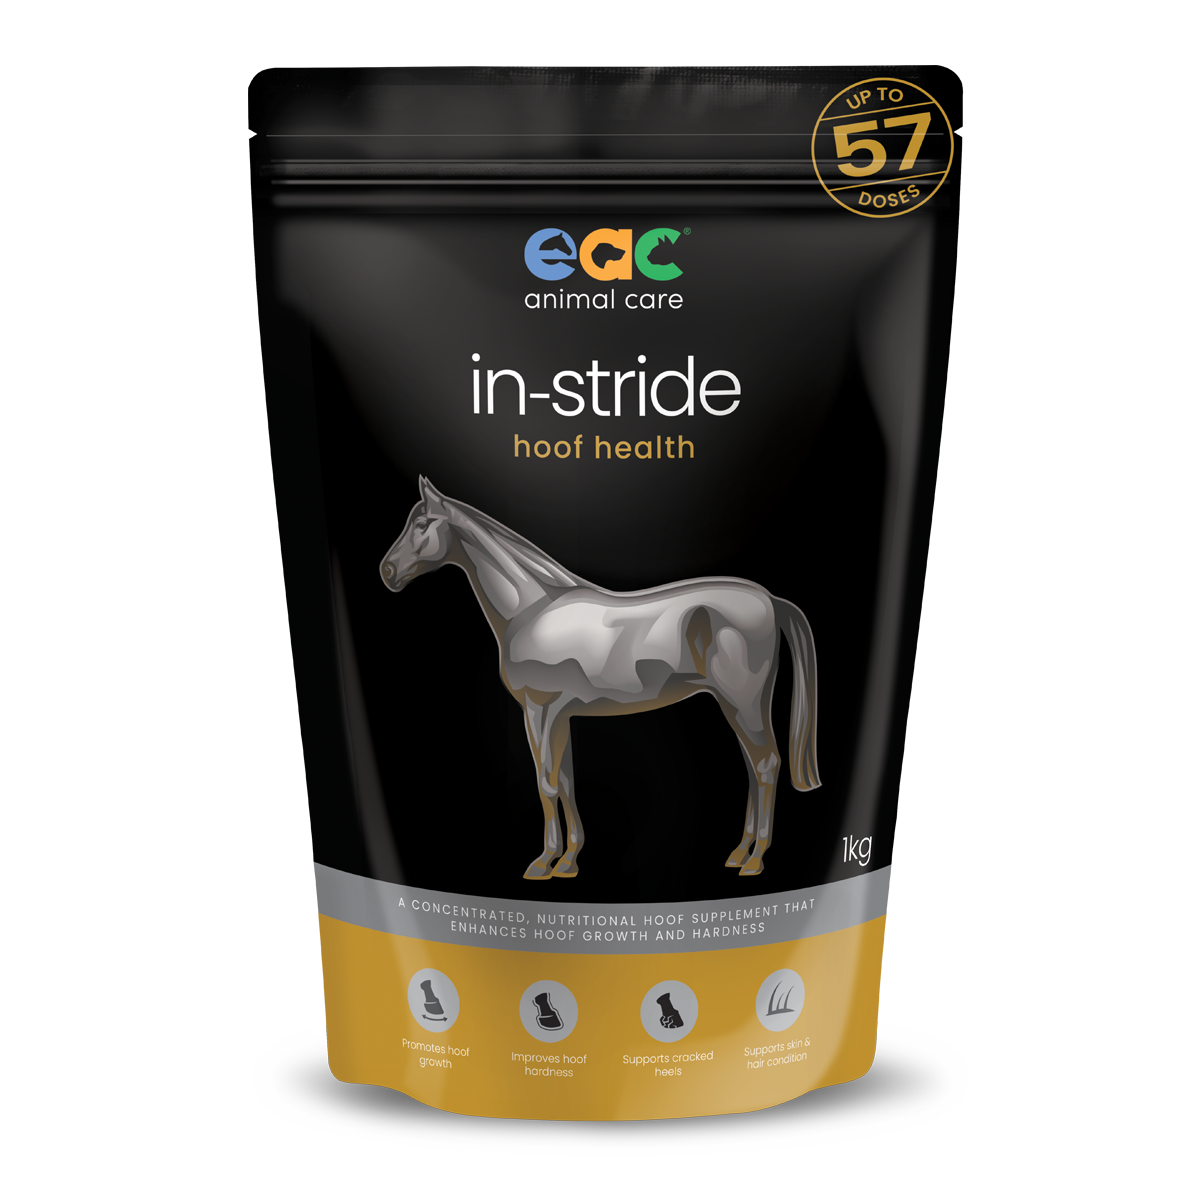 Alt text: "Package of 'in-stride hoof health' horse supplement for enhancing hoof growth and hardness by EAC animal care, with a silver illustration of a horse."